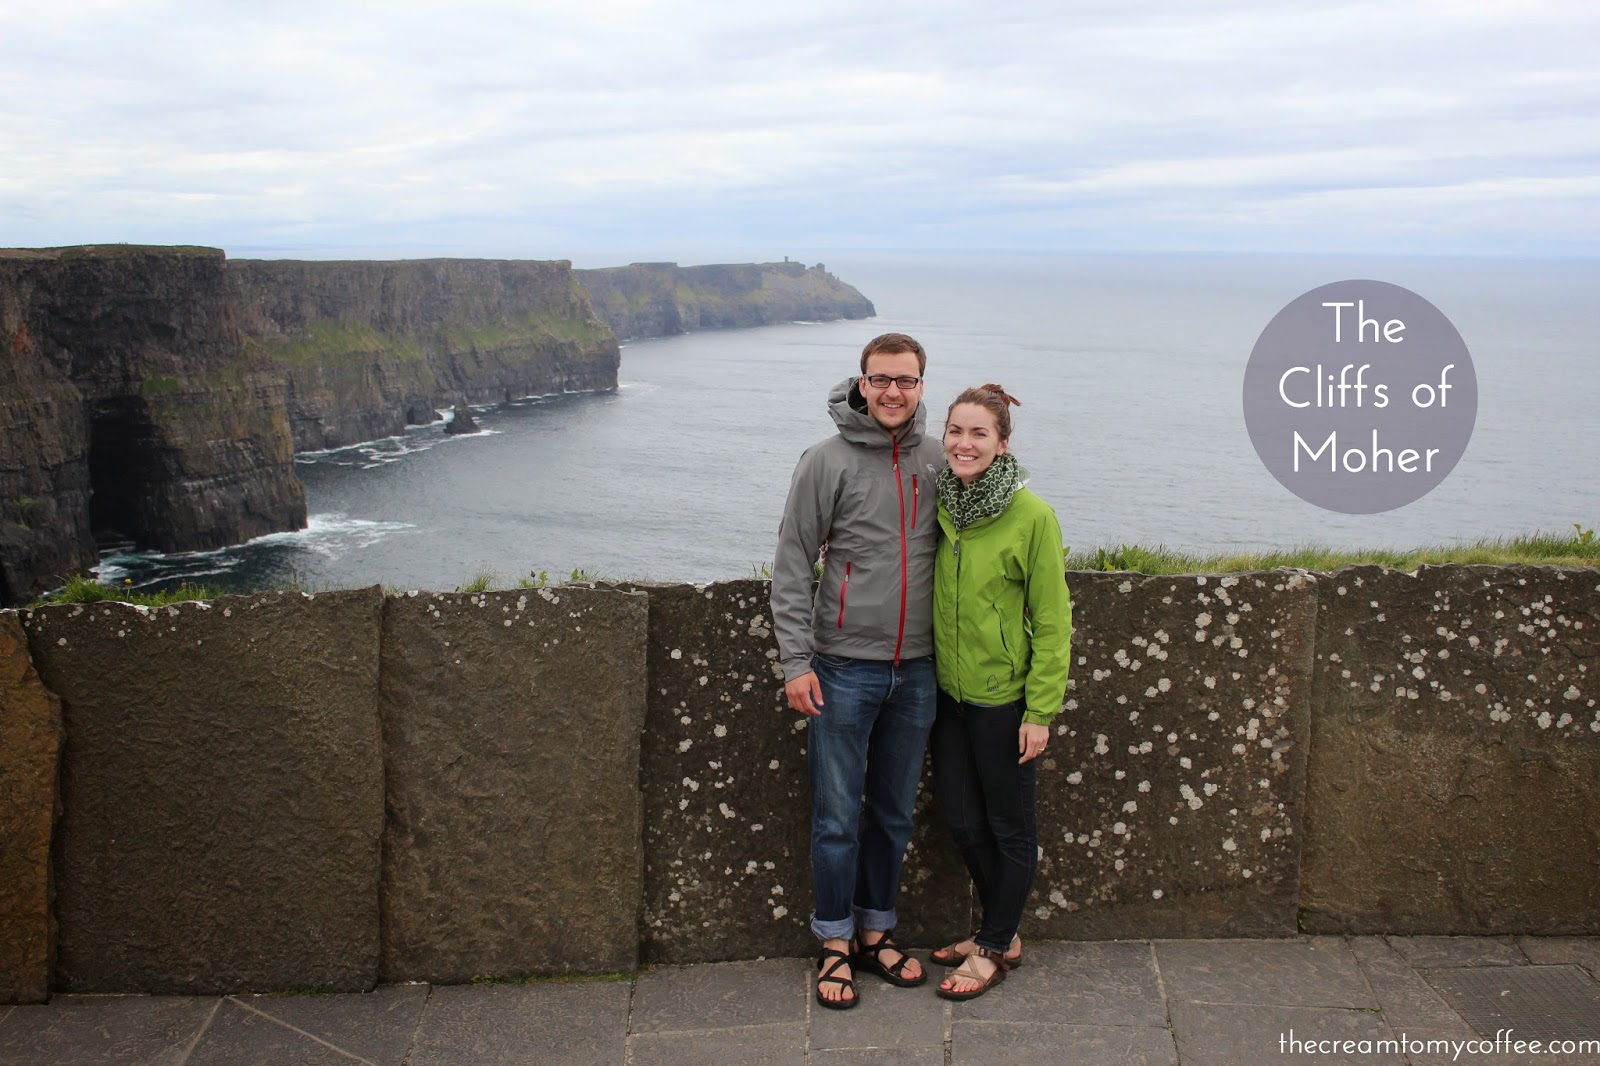 Our European Adventure - What to See in Ireland | The Cream to My Coffee